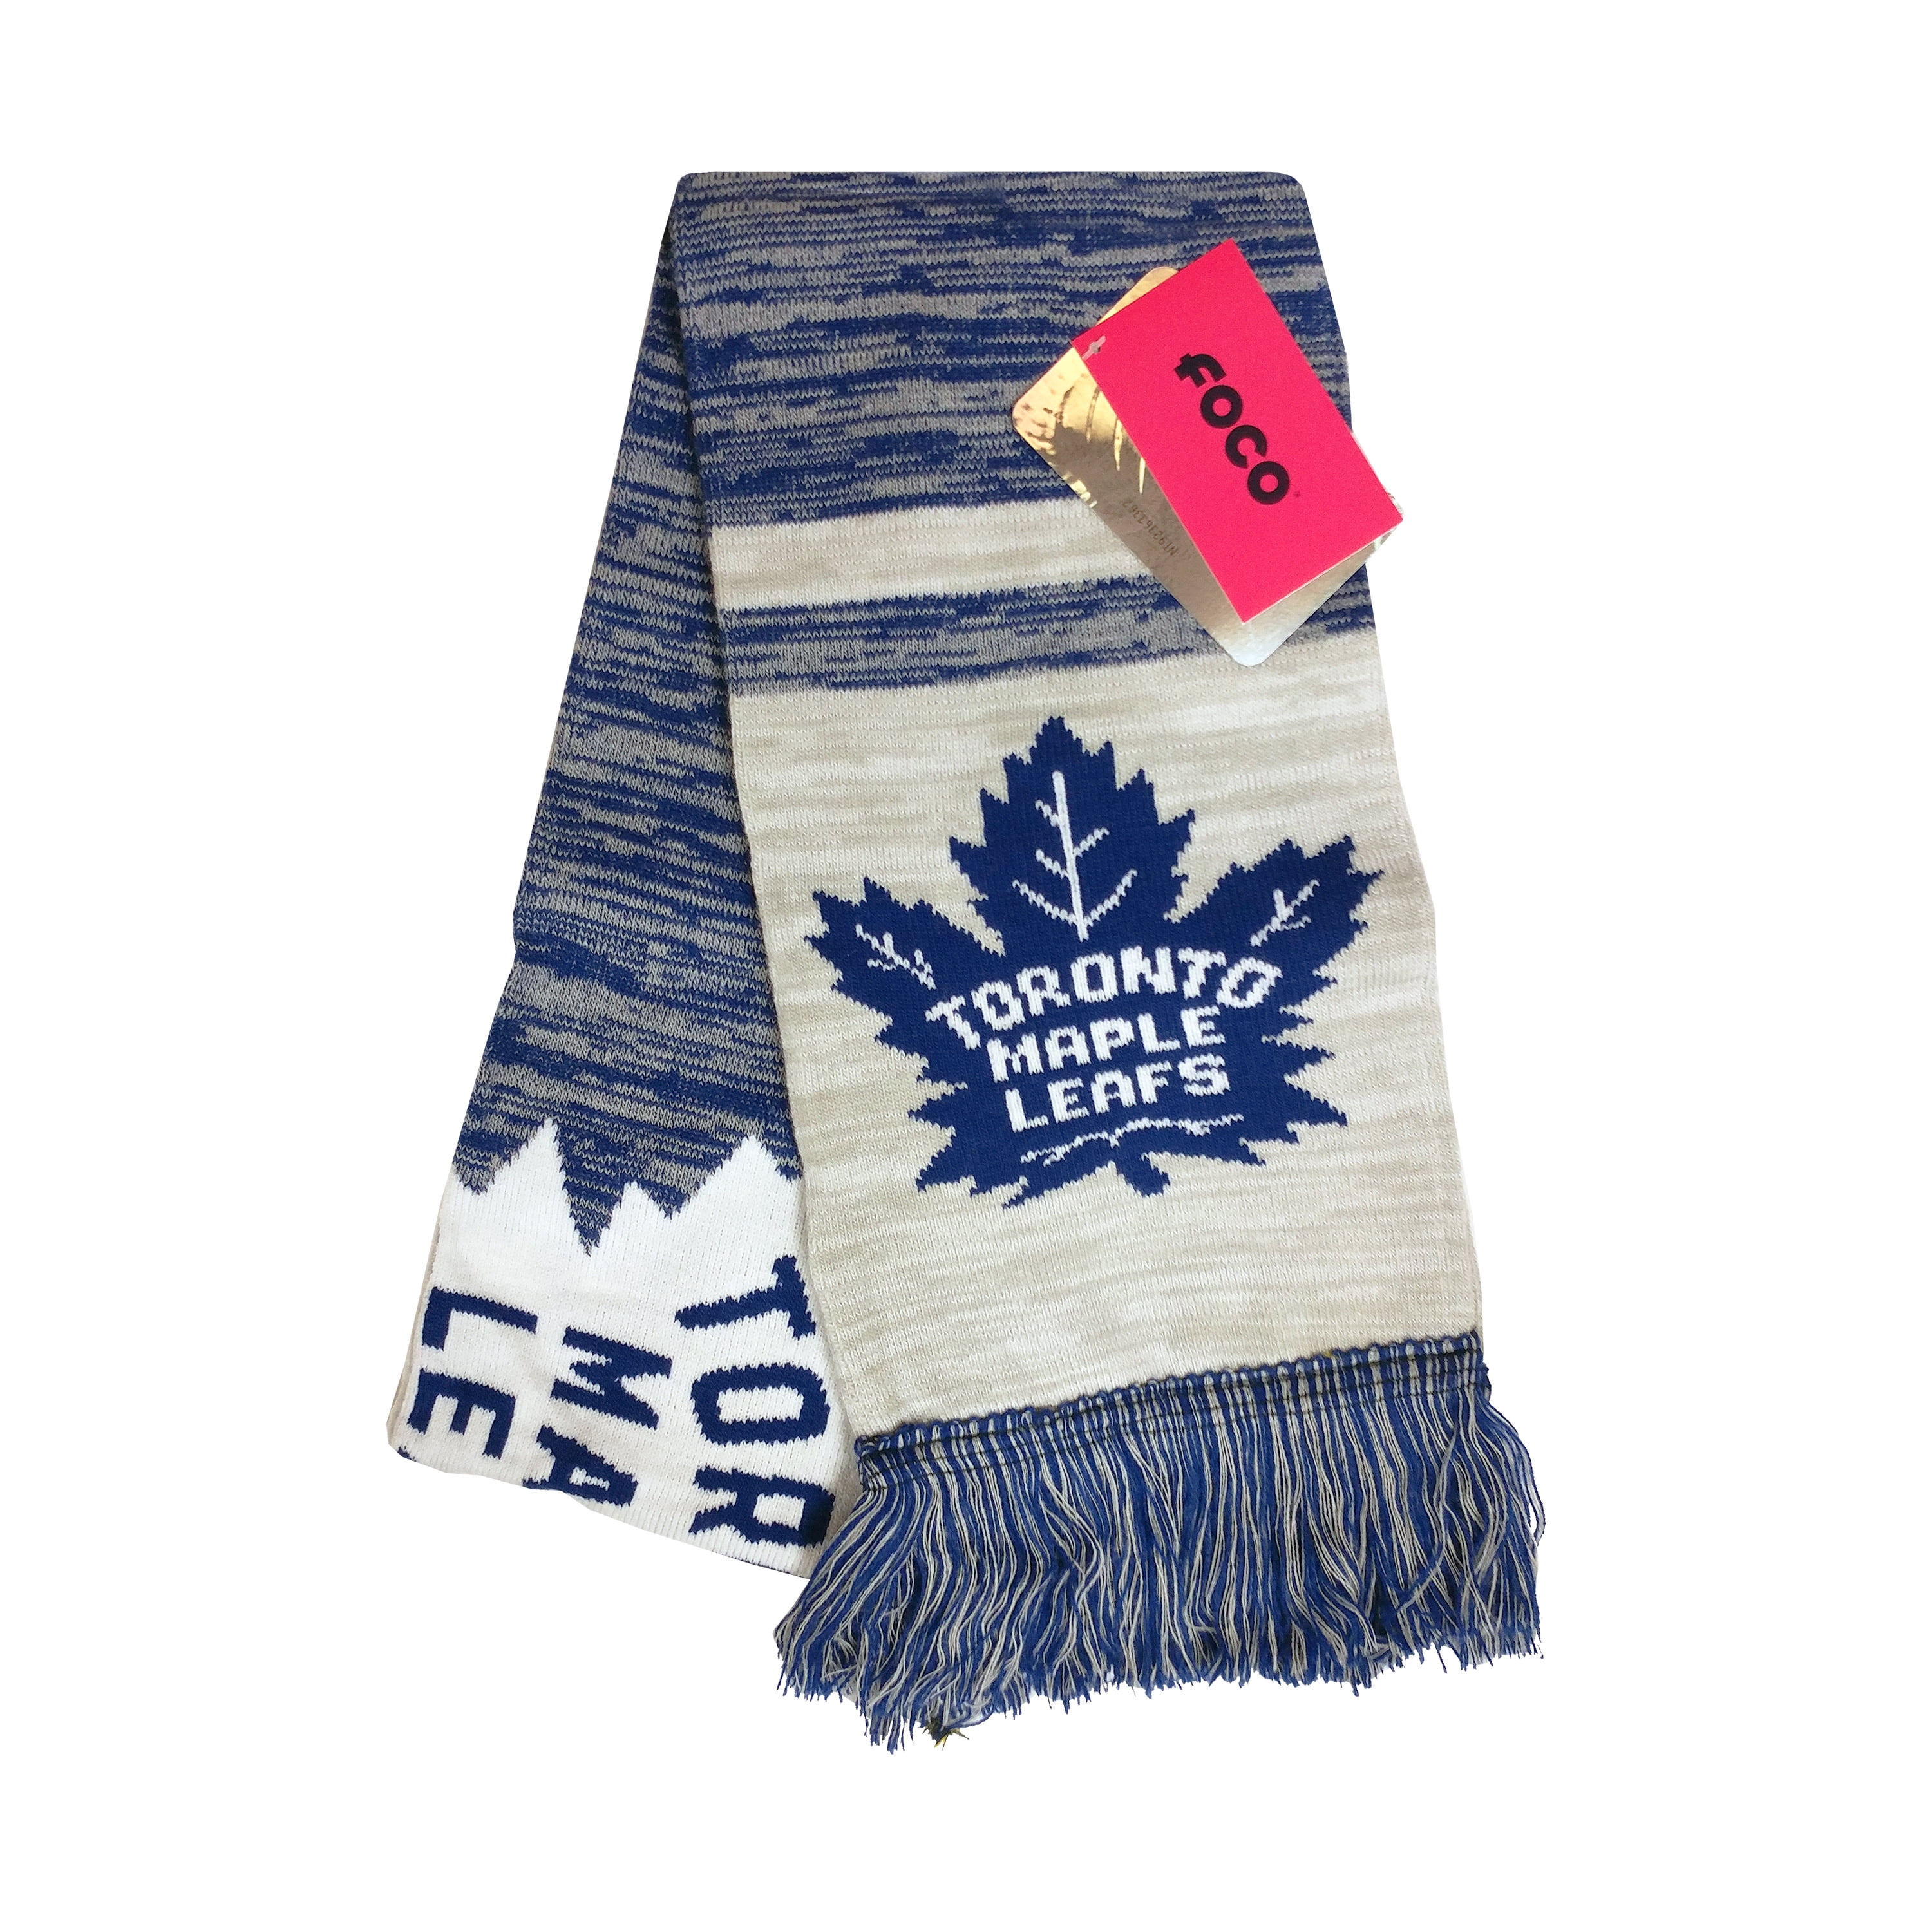 Crochet Royal Blue and White Toronto Maple Leafs Unisex Scarf Team Colors Infinity Scarf Tampa Bay Lightning